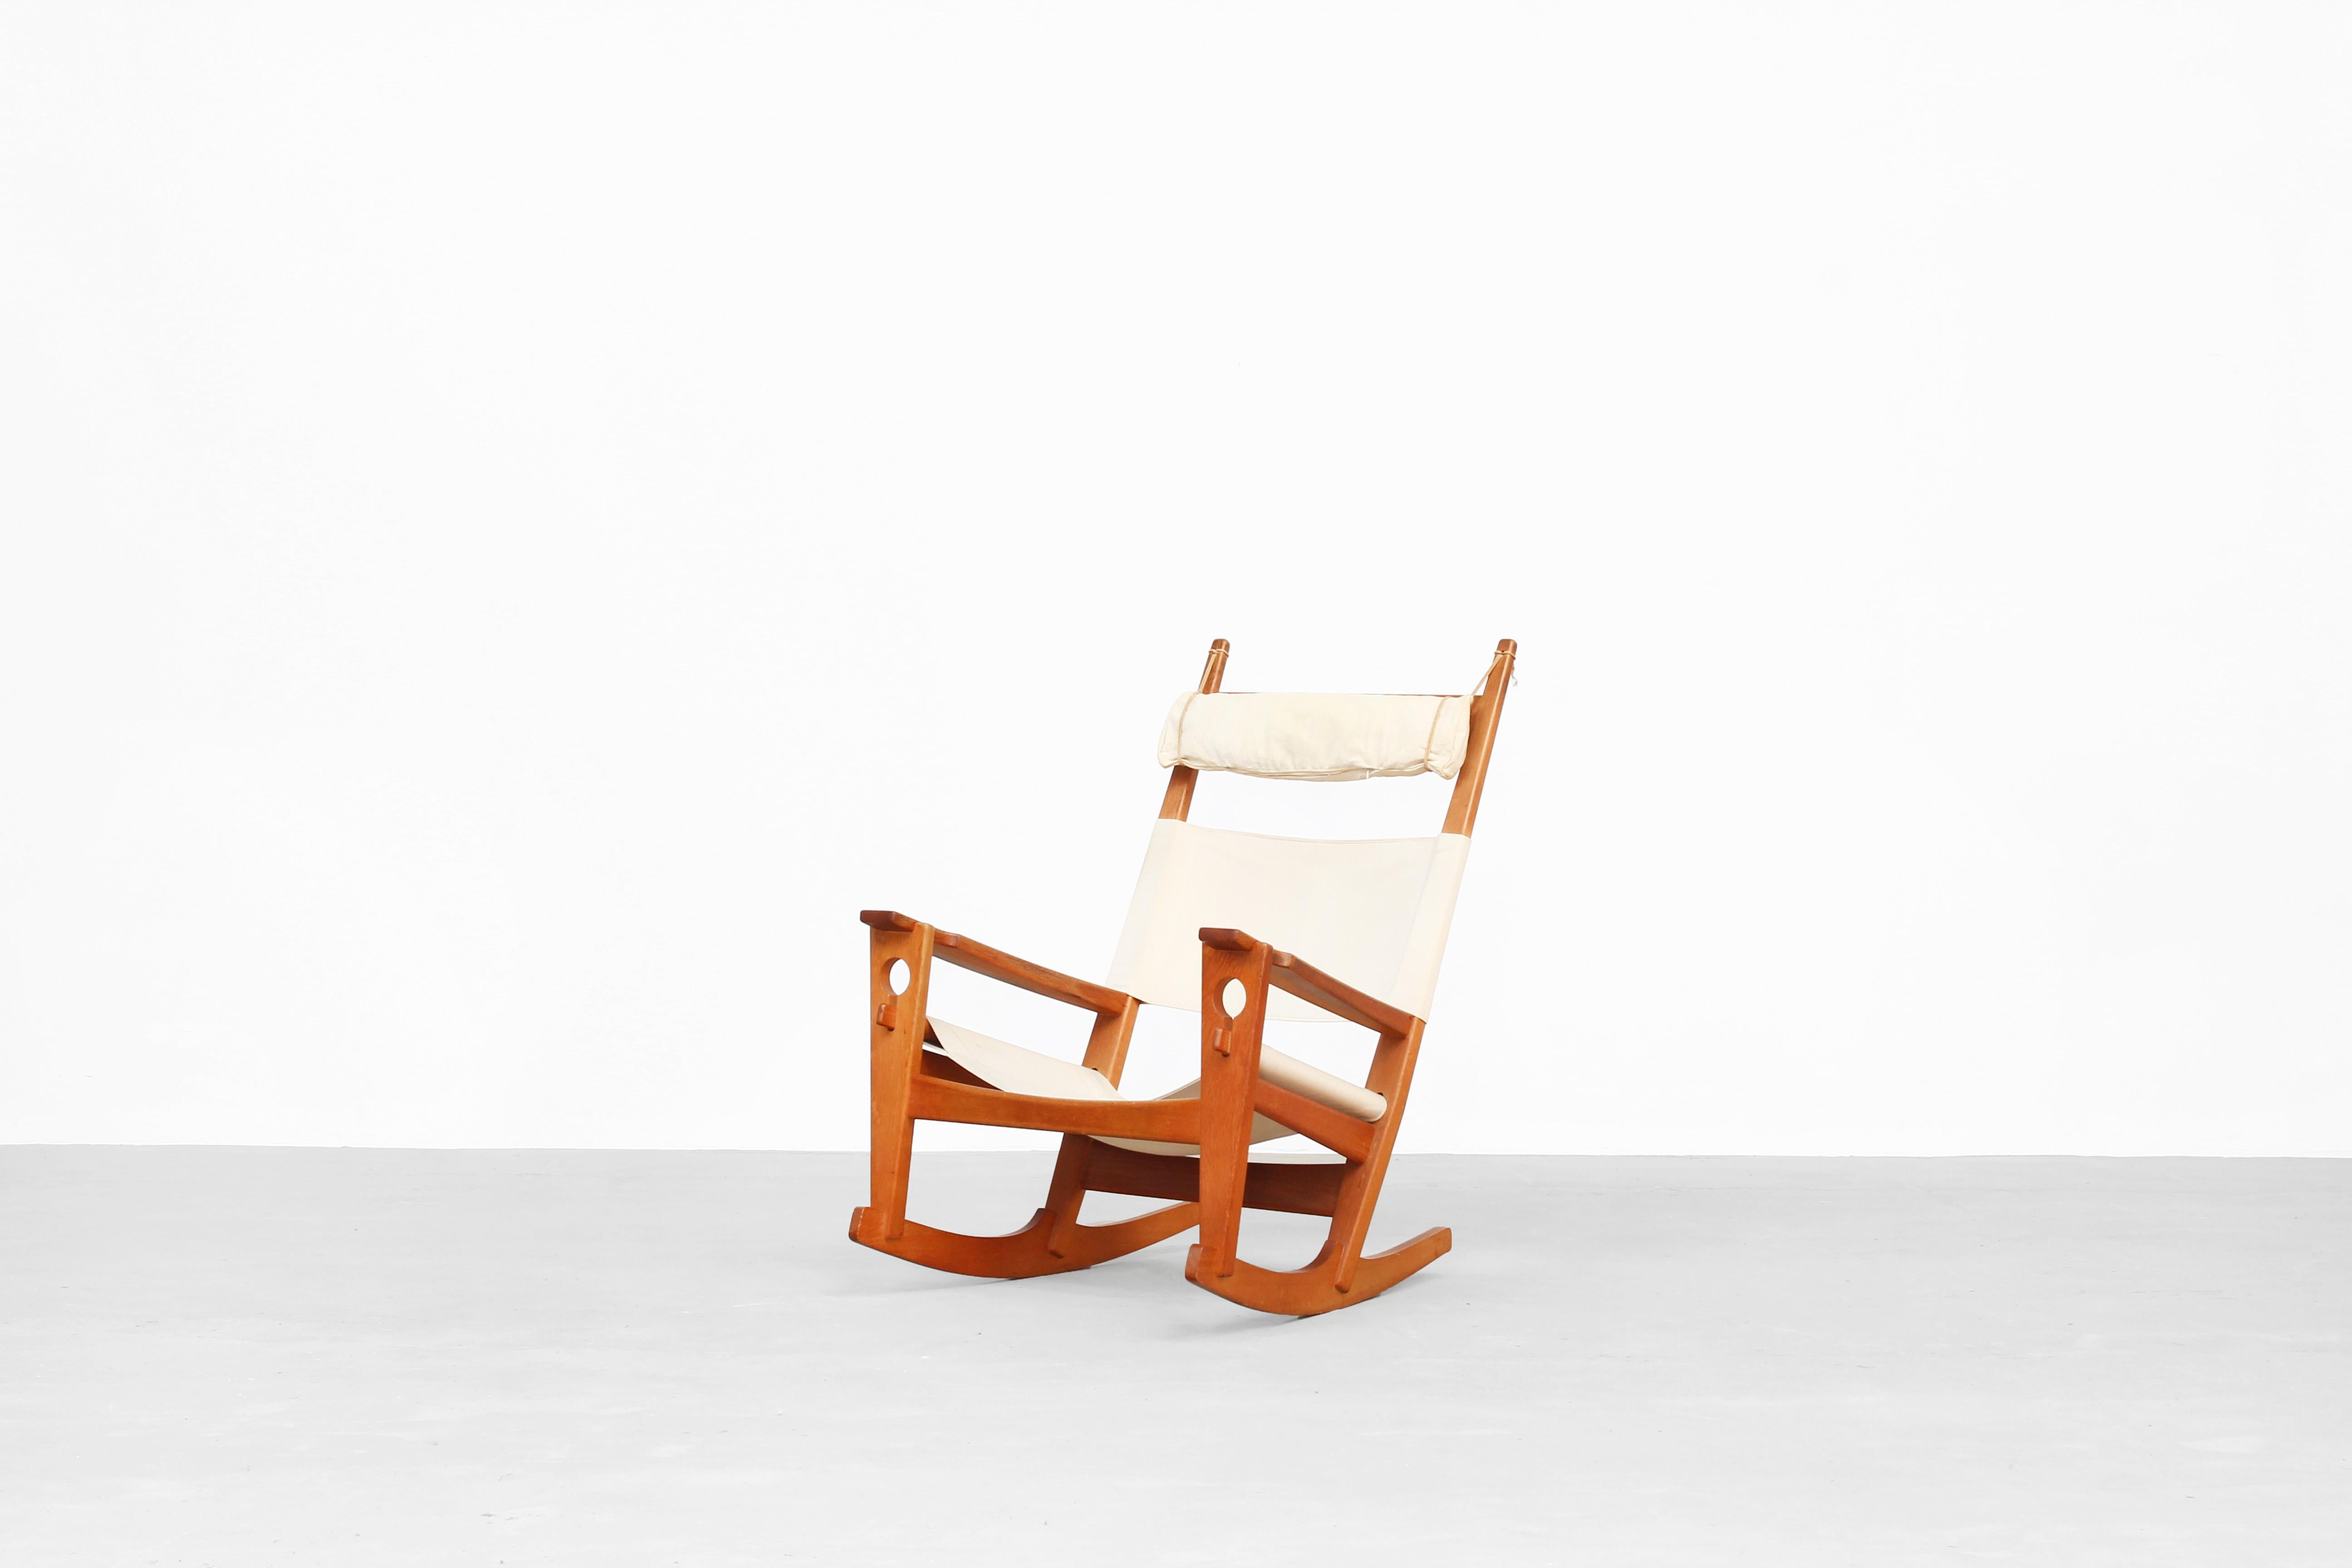 Beautiful rocking chair designed by Hans J. Wegner and produced by GETAMA in the 1960ies in Denmark. The chair is in a wonderful original condition. The oak wood is beautifully patinated and the fabric is without any damages.